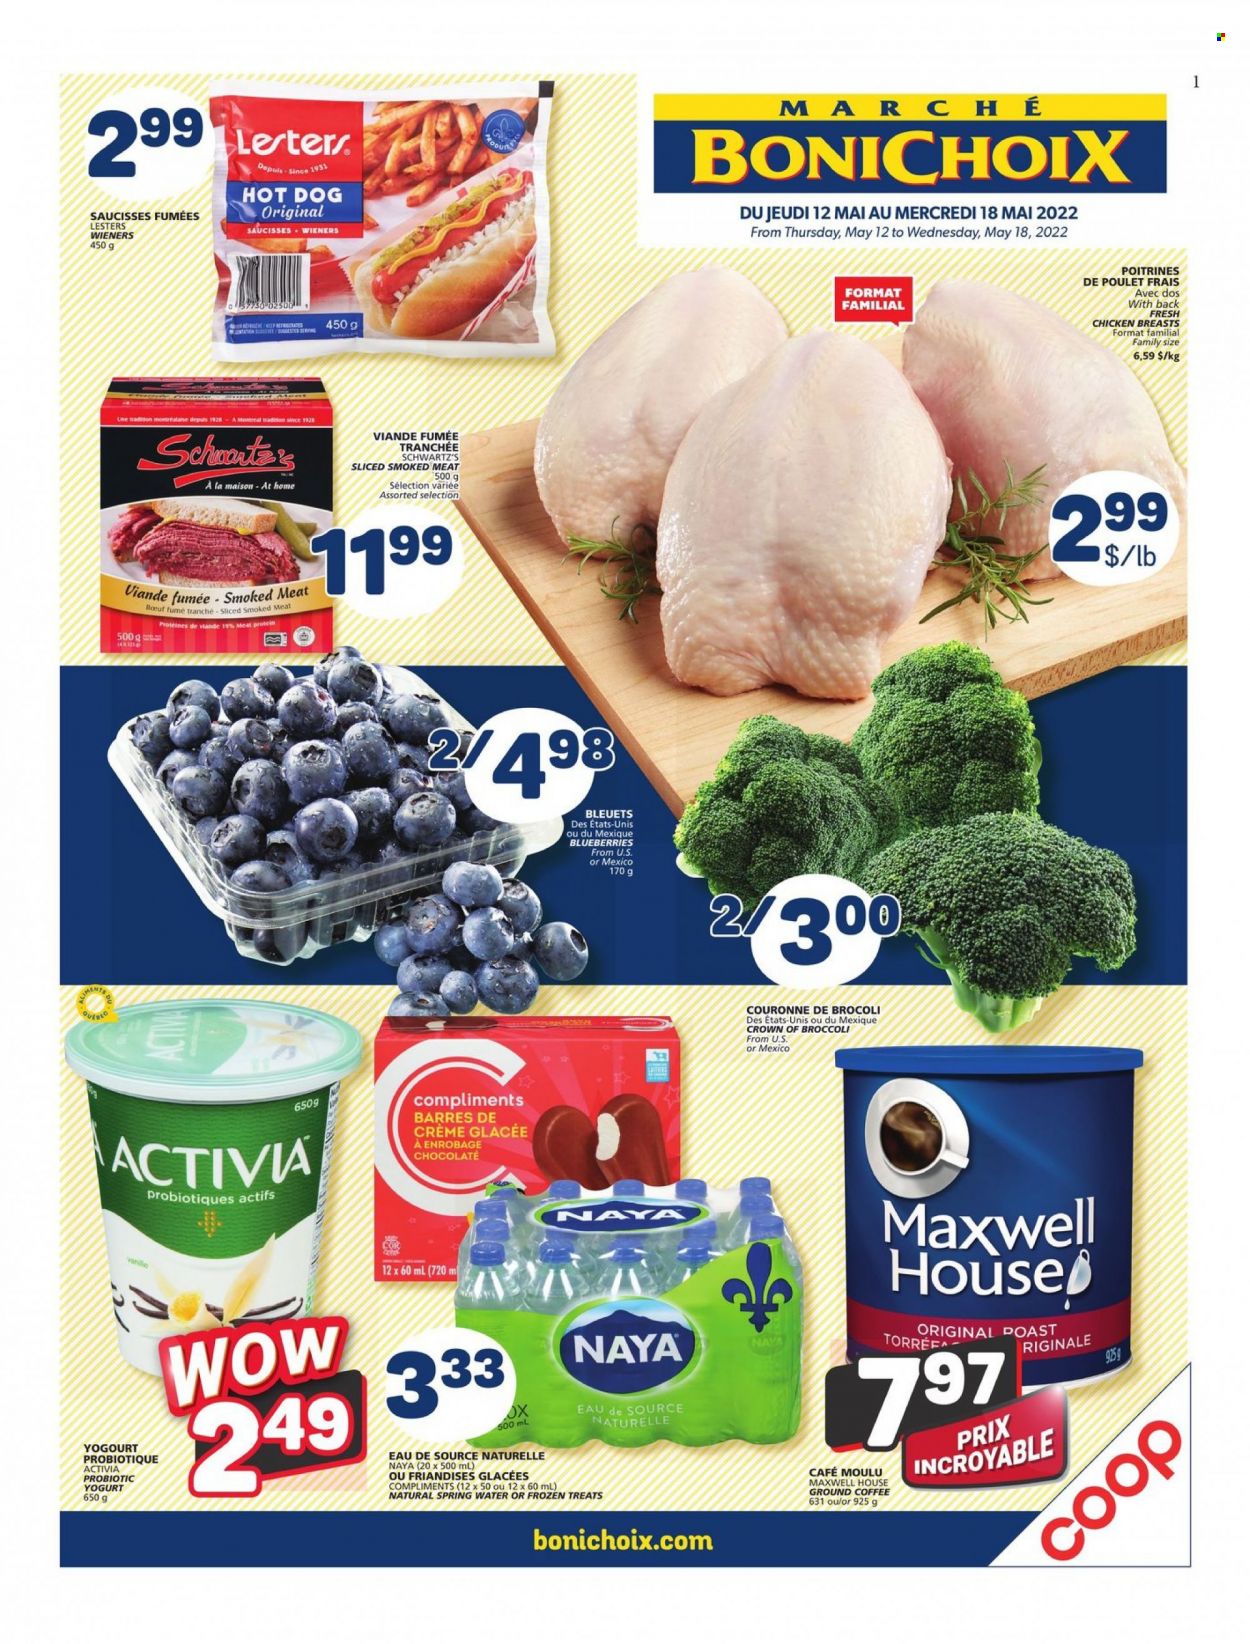 thumbnail - Marché Bonichoix Flyer - May 12, 2022 - May 18, 2022 - Sales products - broccoli, blueberries, hot dog, yoghurt, probiotic yoghurt, Activia, spring water, Maxwell House, coffee, ground coffee, chicken breasts. Page 1.